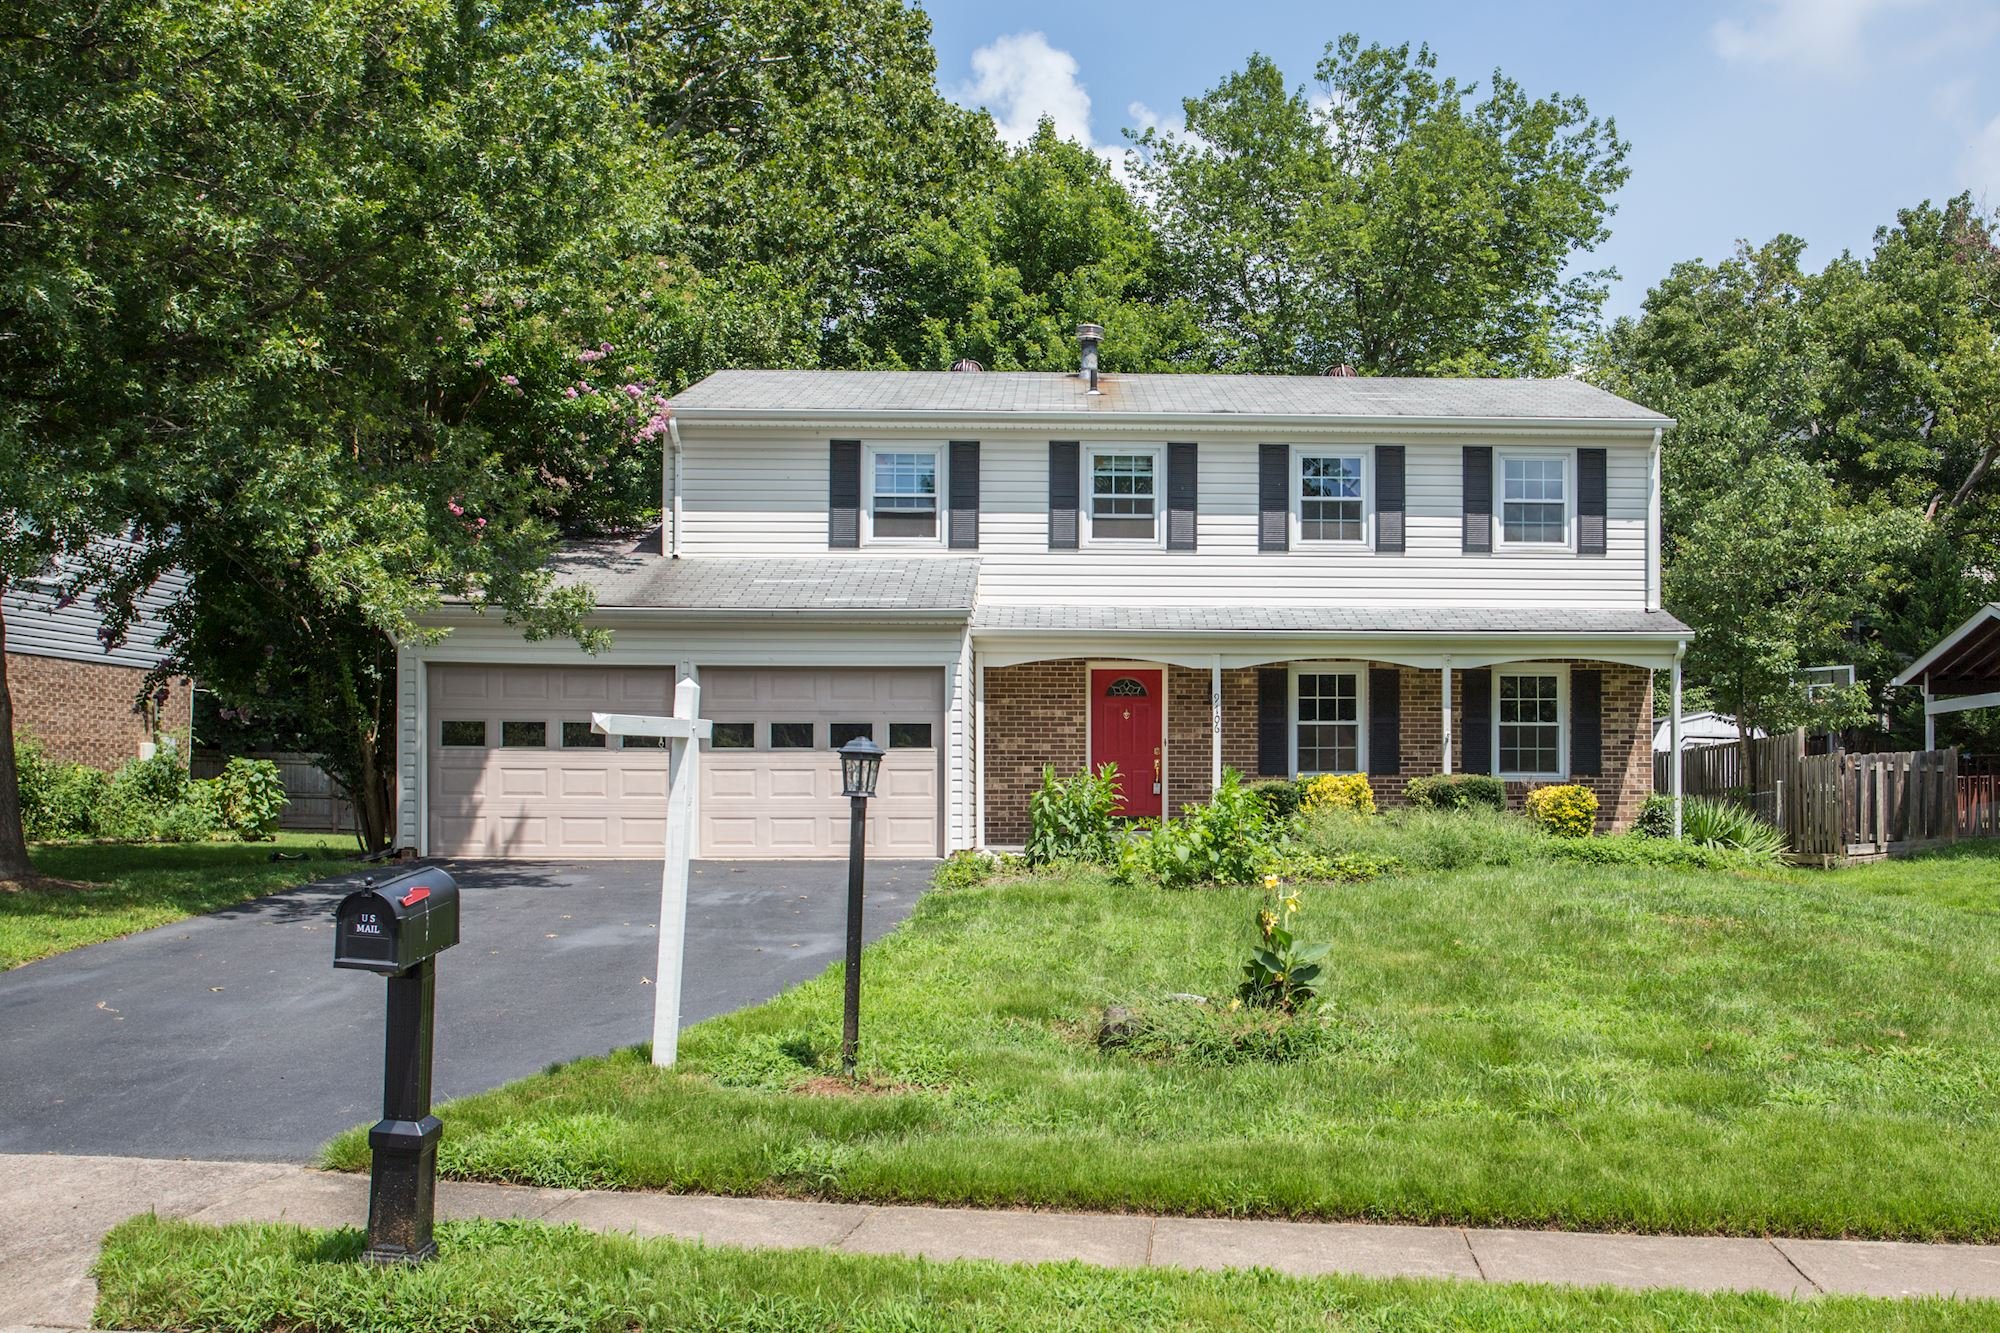 NEW LISTING: Turnkey Colonial With Large Living Spaces in Fairfax, VA